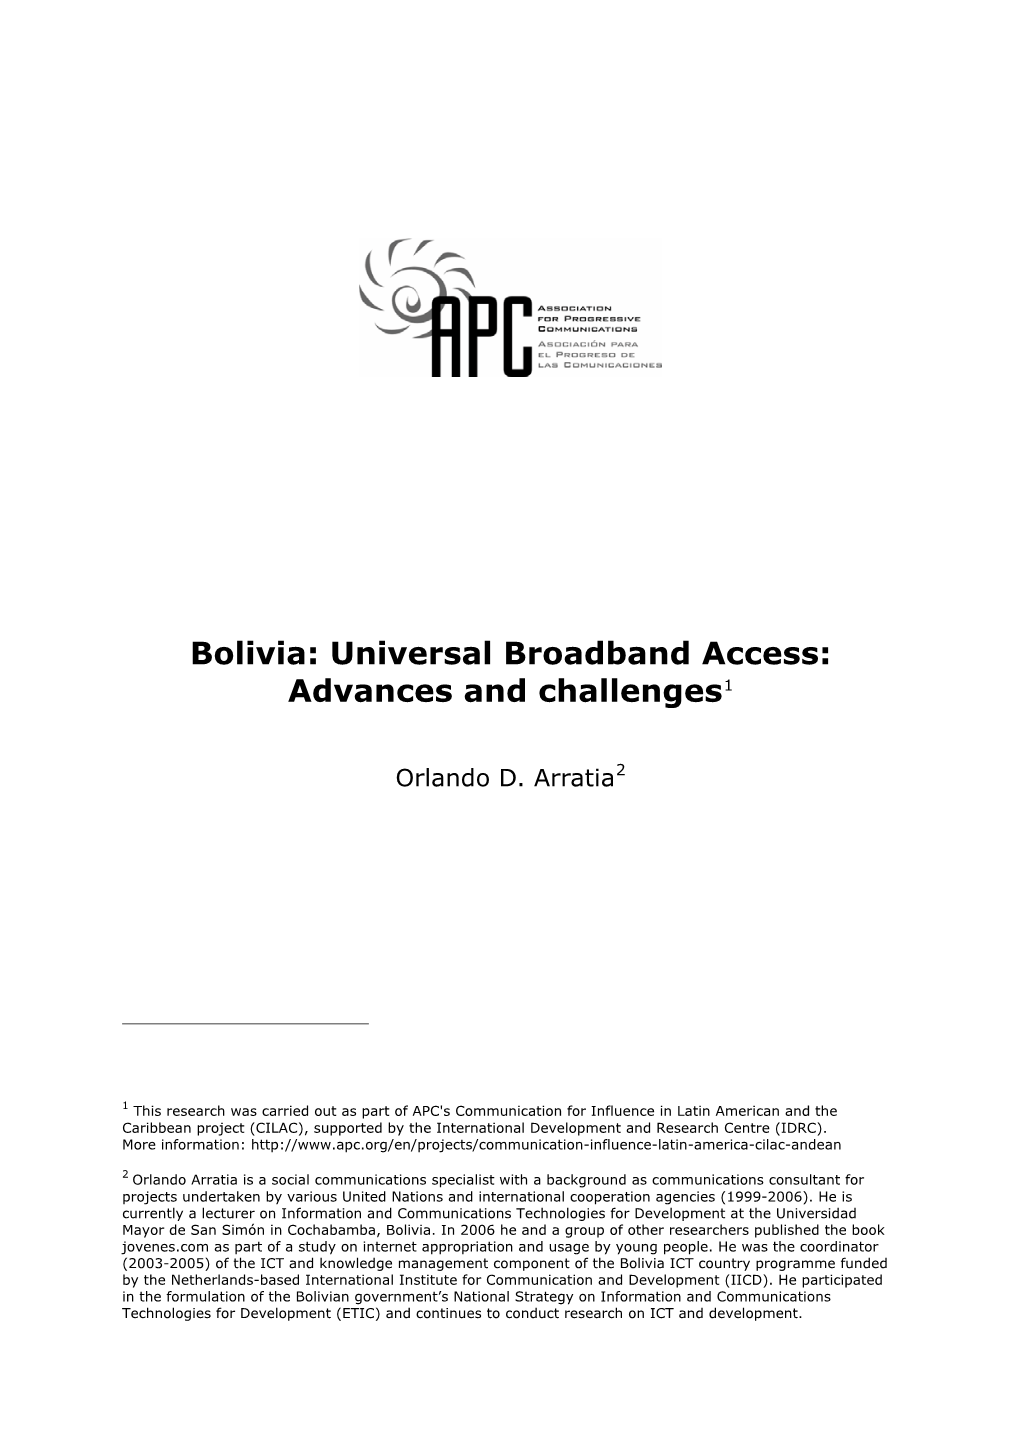 Bolivia: Universal Broadband Access: Advances and Challenges1